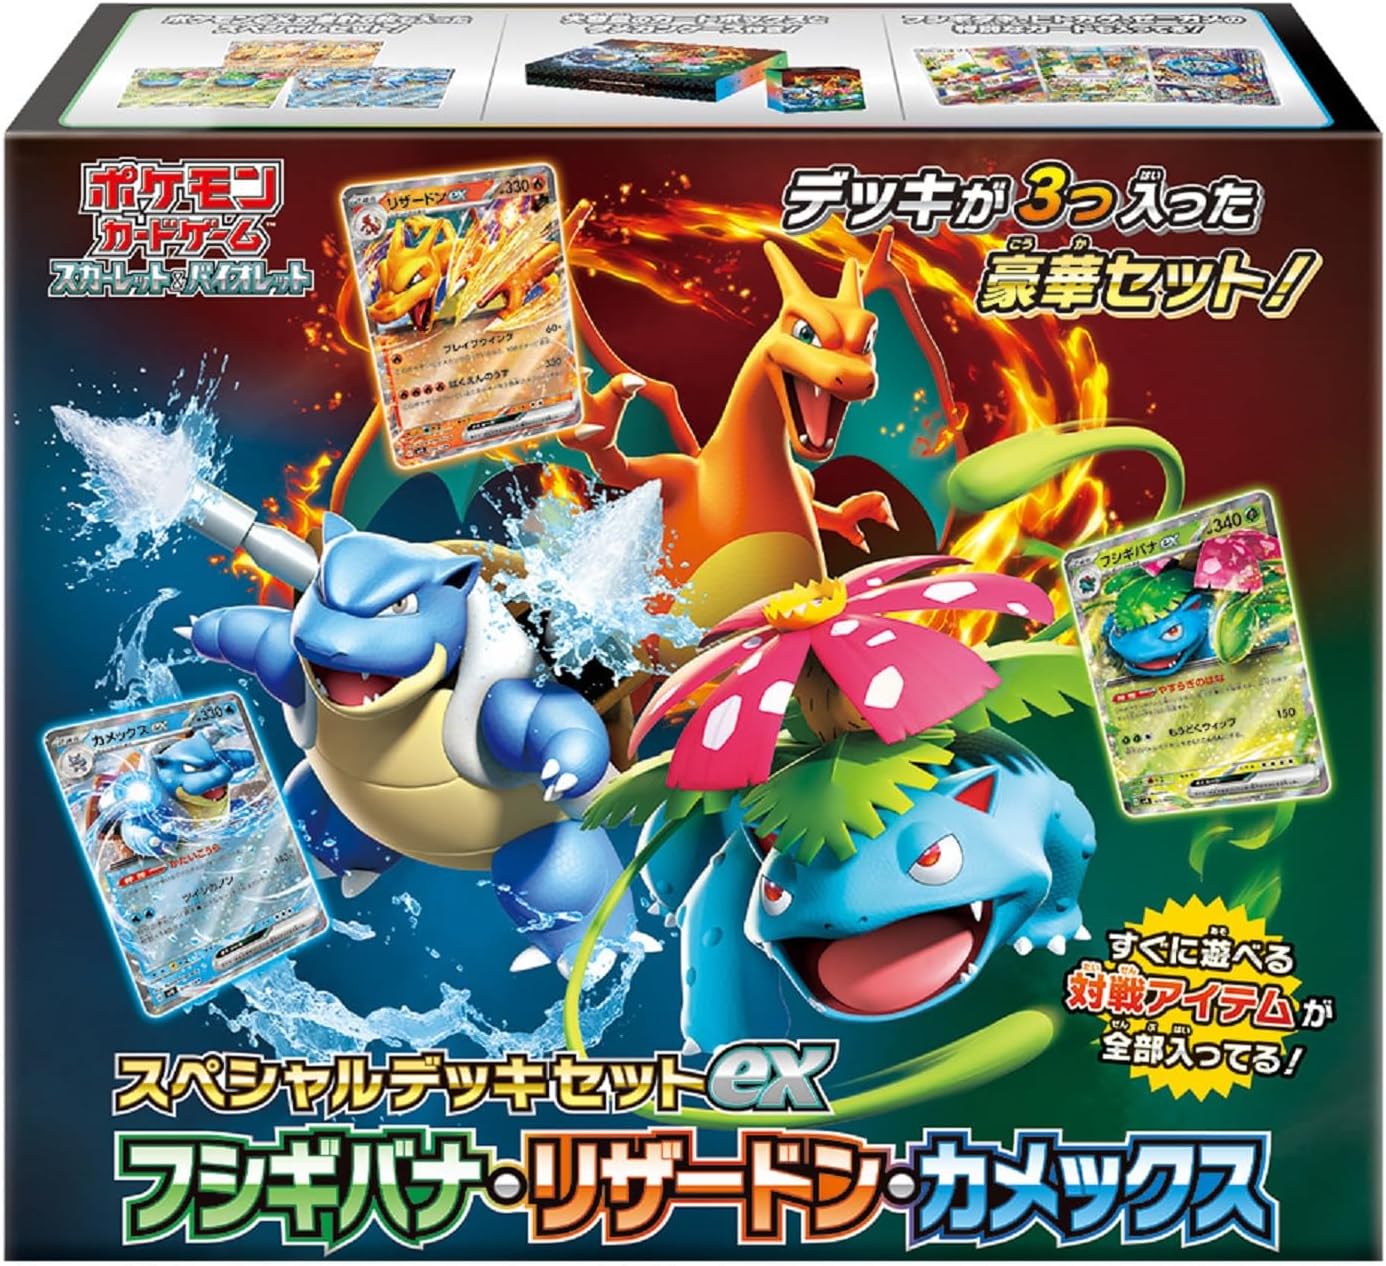 Illustration Rares of Kanto Starters to Release in 